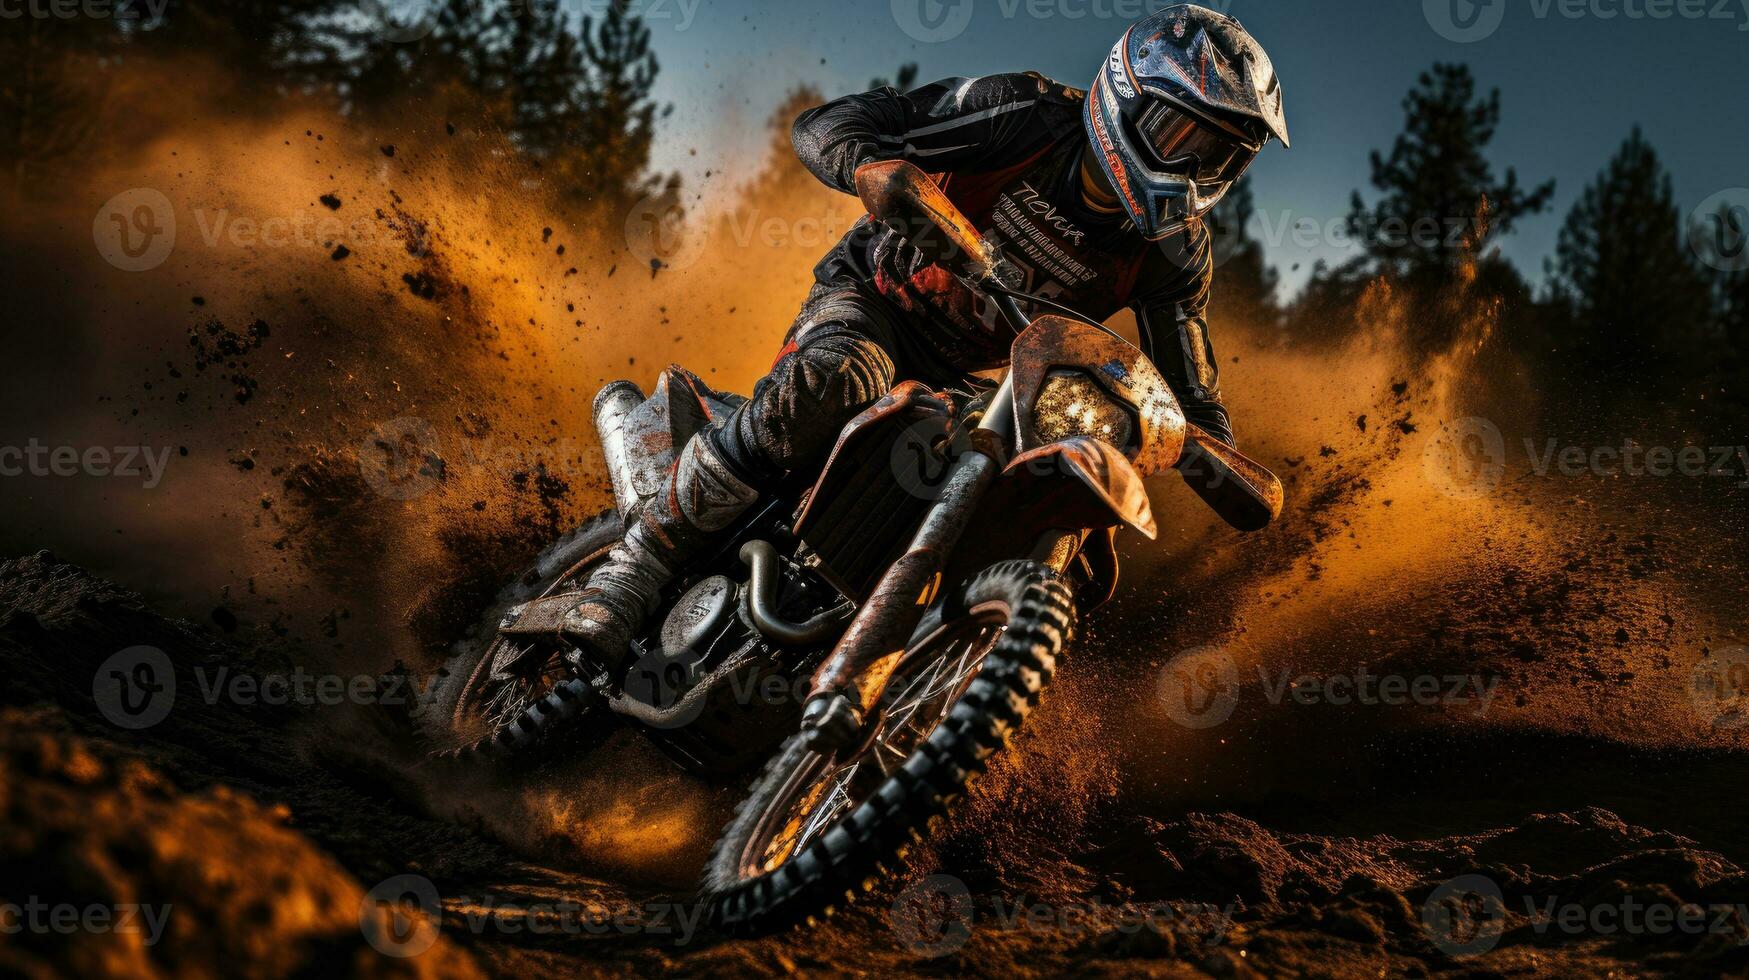 Motocross rider creates a lot of dust and dirt photo